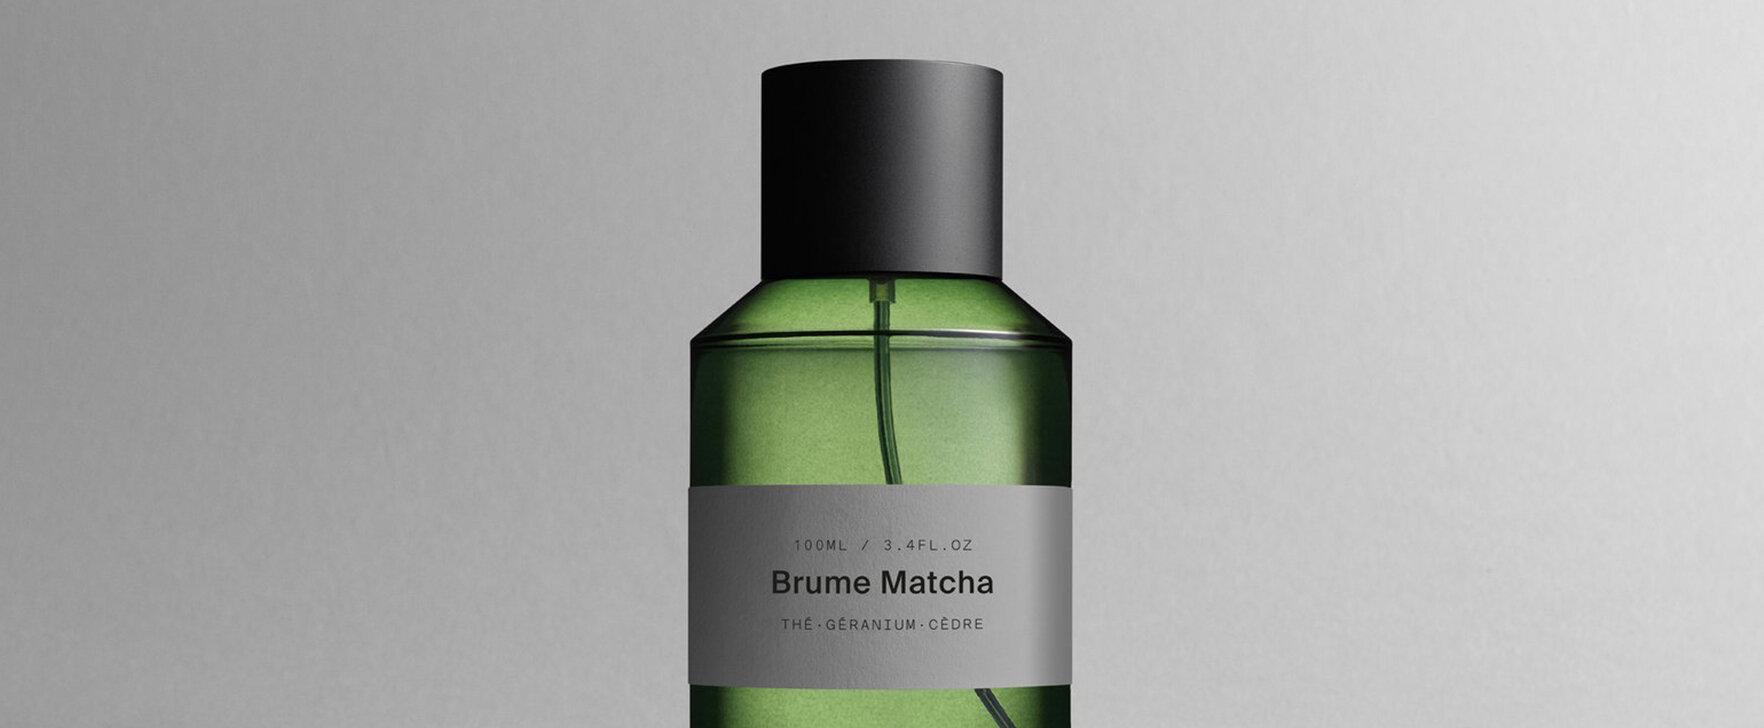 An Aromatic Time-out: The New "Brume Matcha" Eau de Parfum From Marie Jeanne